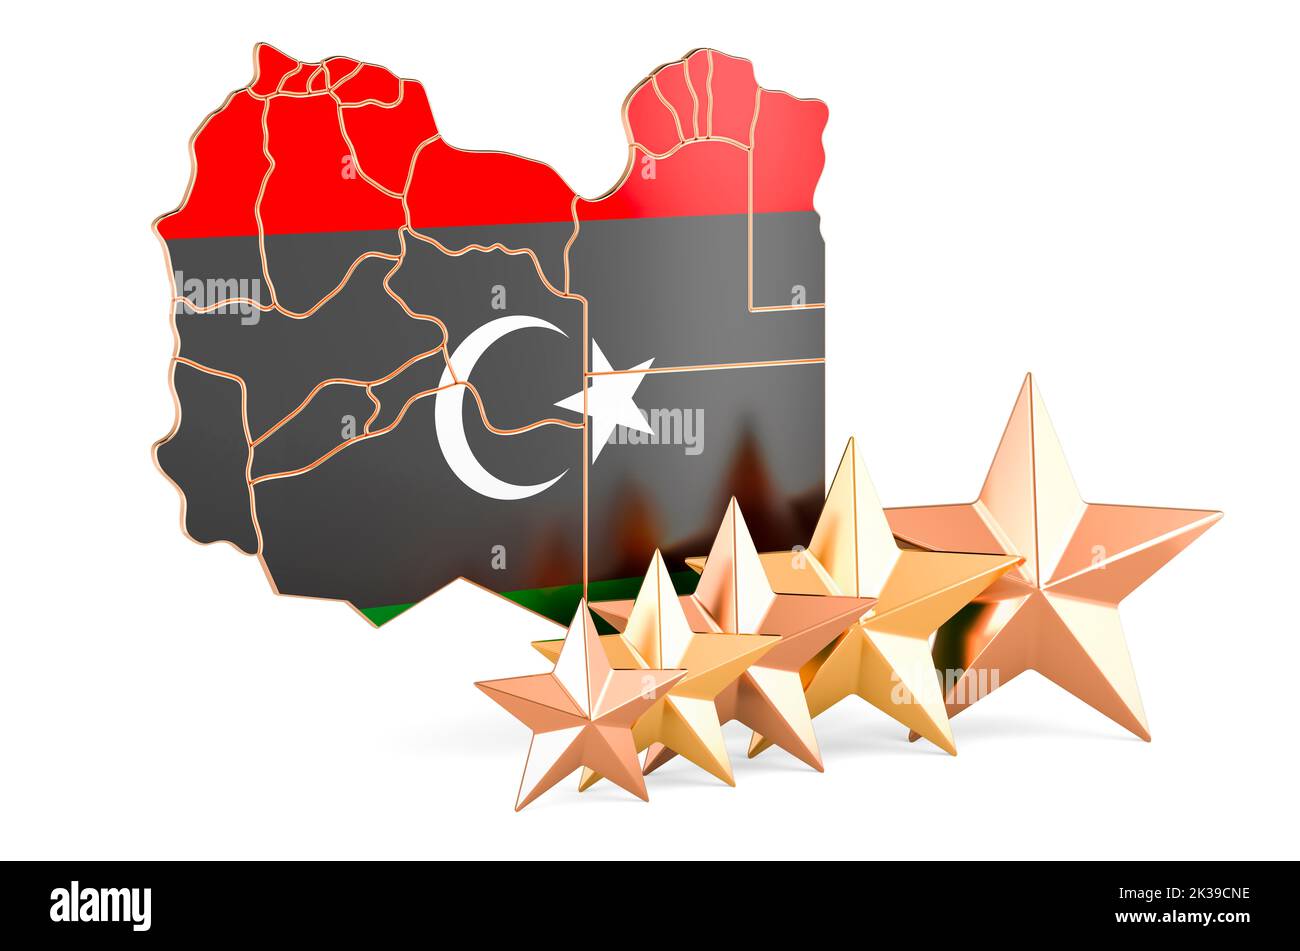 Libyan map with five stars. Rating, quality, service in Libya. 3D rendering isolated on white background Stock Photo